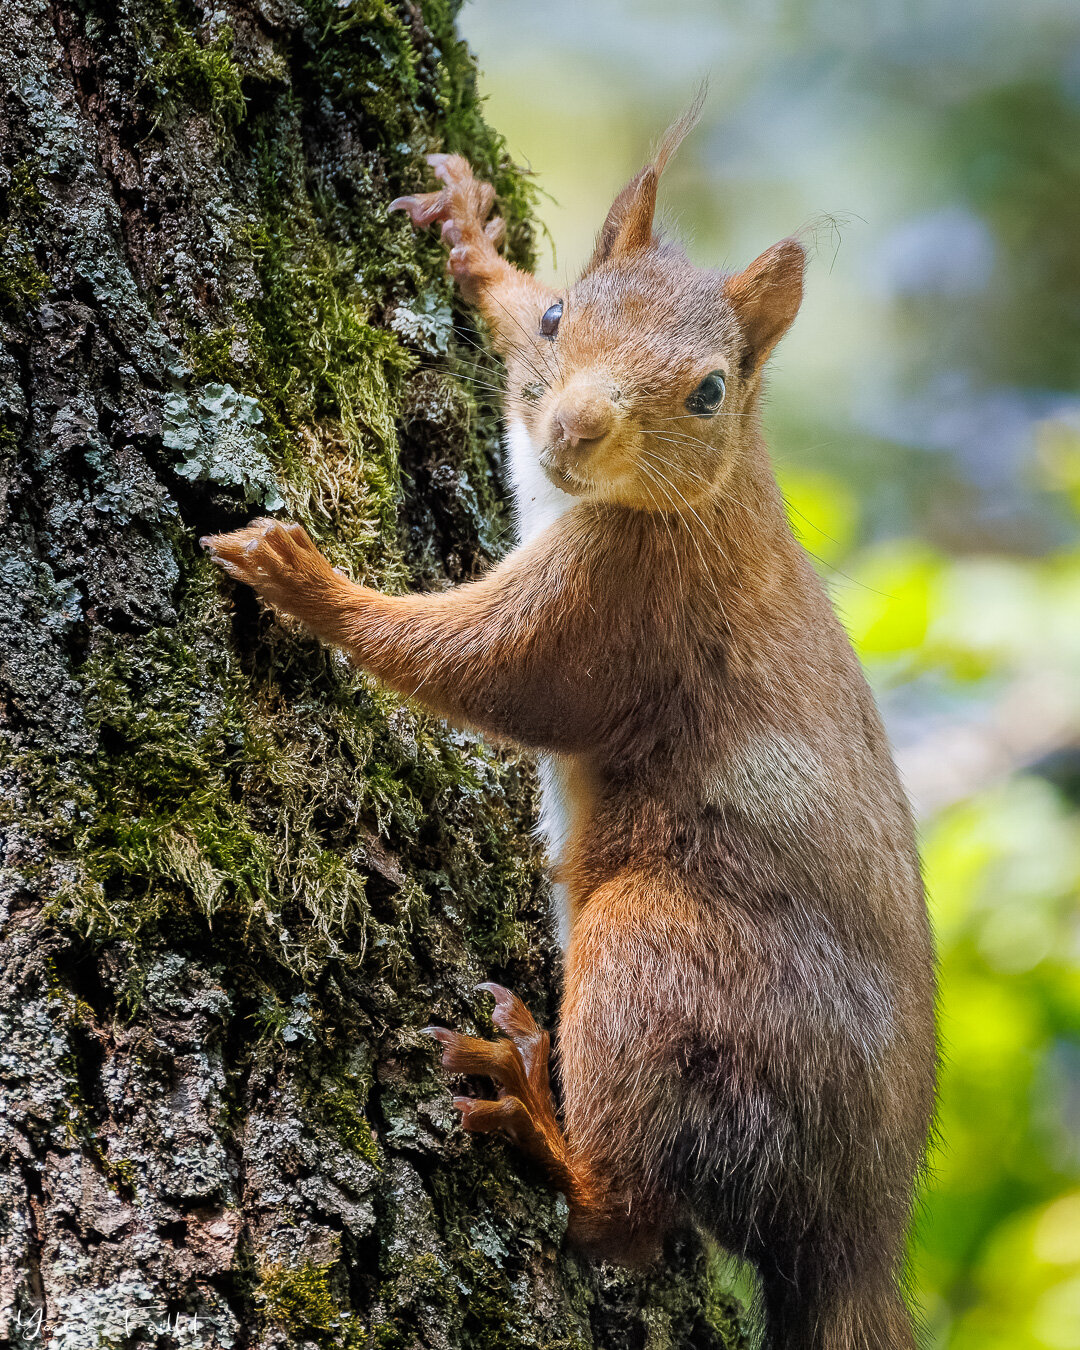 🇳🇿 My very first squirrel shot ever. I didn&rsquo;t get the tail in the frame, it was too close. Nooooooo !
📷 800mm, 1/640sec, f/11, IS0 8000

🇫🇷 Ma toute premi&egrave;re photo d&rsquo;un &eacute;cureuil. Al queue ne rentrait pas dans le cadre, 